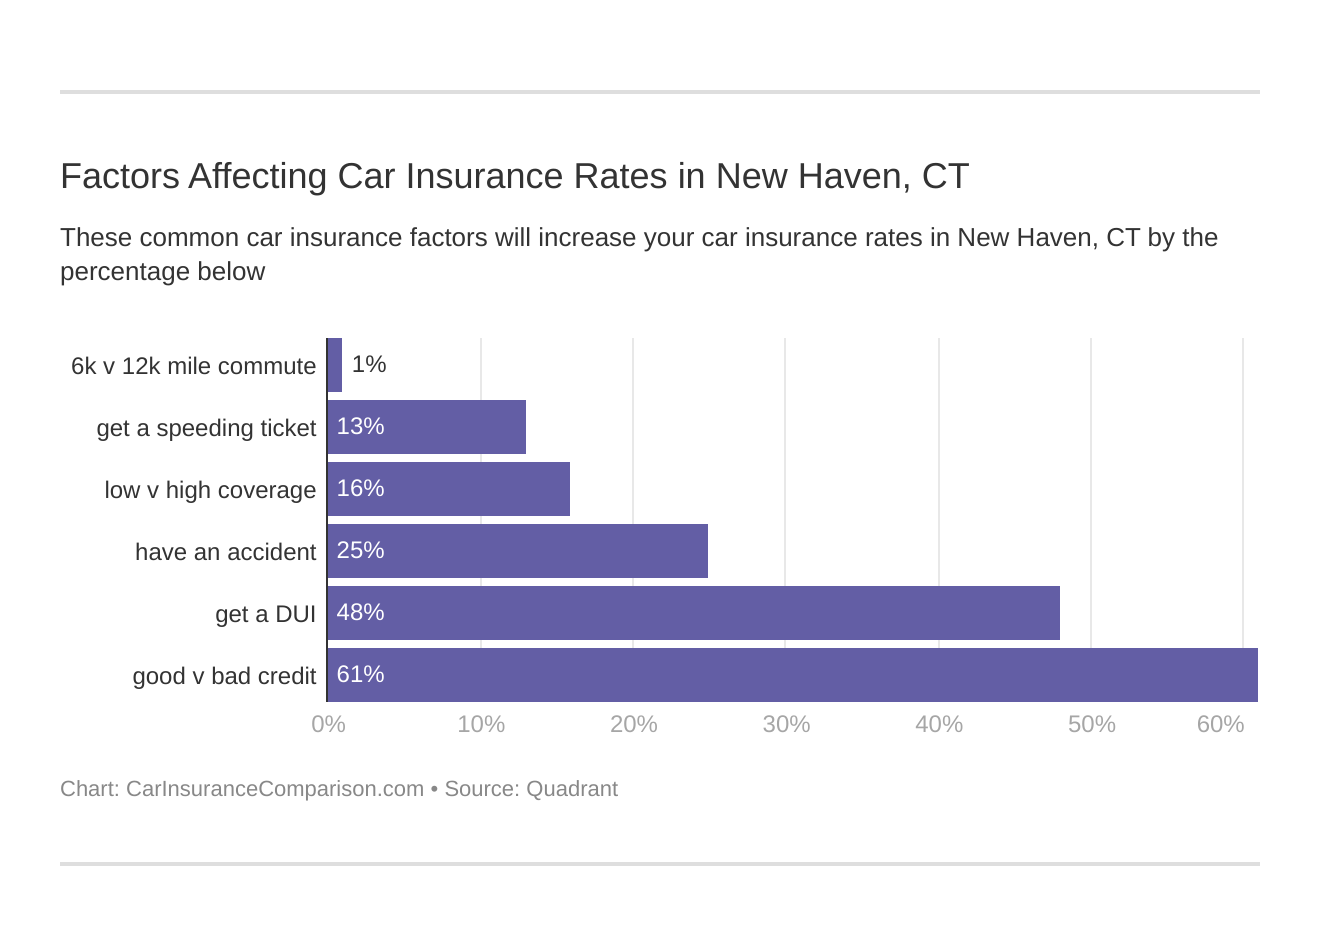 Factors Affecting Car Insurance Rates in New Haven, CT